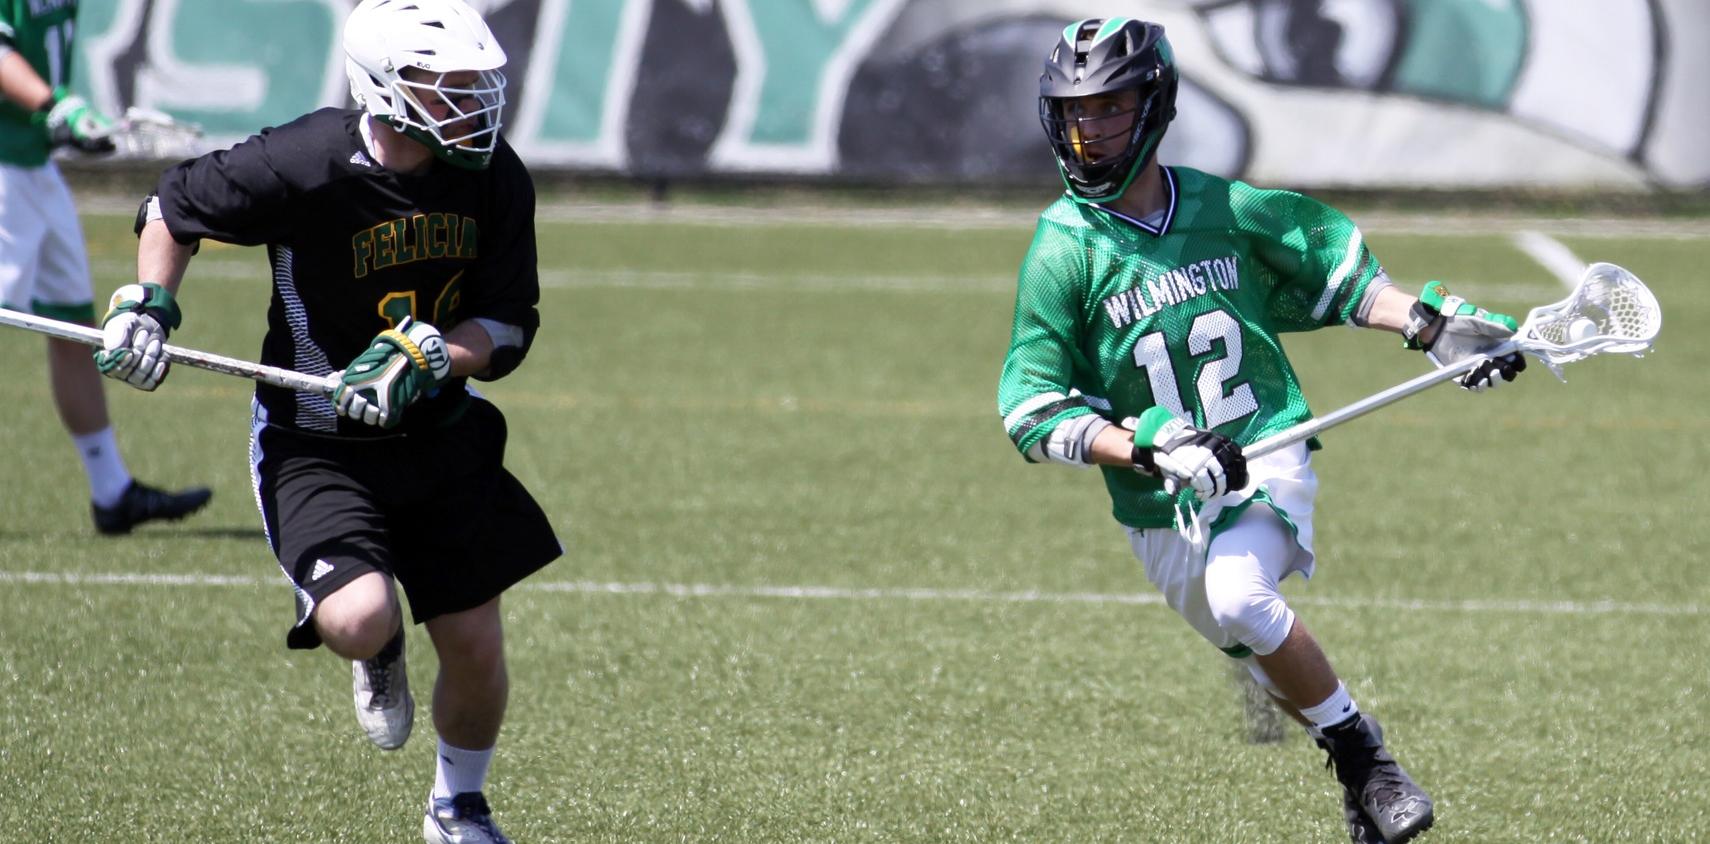 Copyright 2018; Wilmington University. All rights reserved. File photo of Chris Smith who led the team with four goals at Lees-McCrae. Photo by Dan Lauletta. April 14, 2018 vs. Felician.